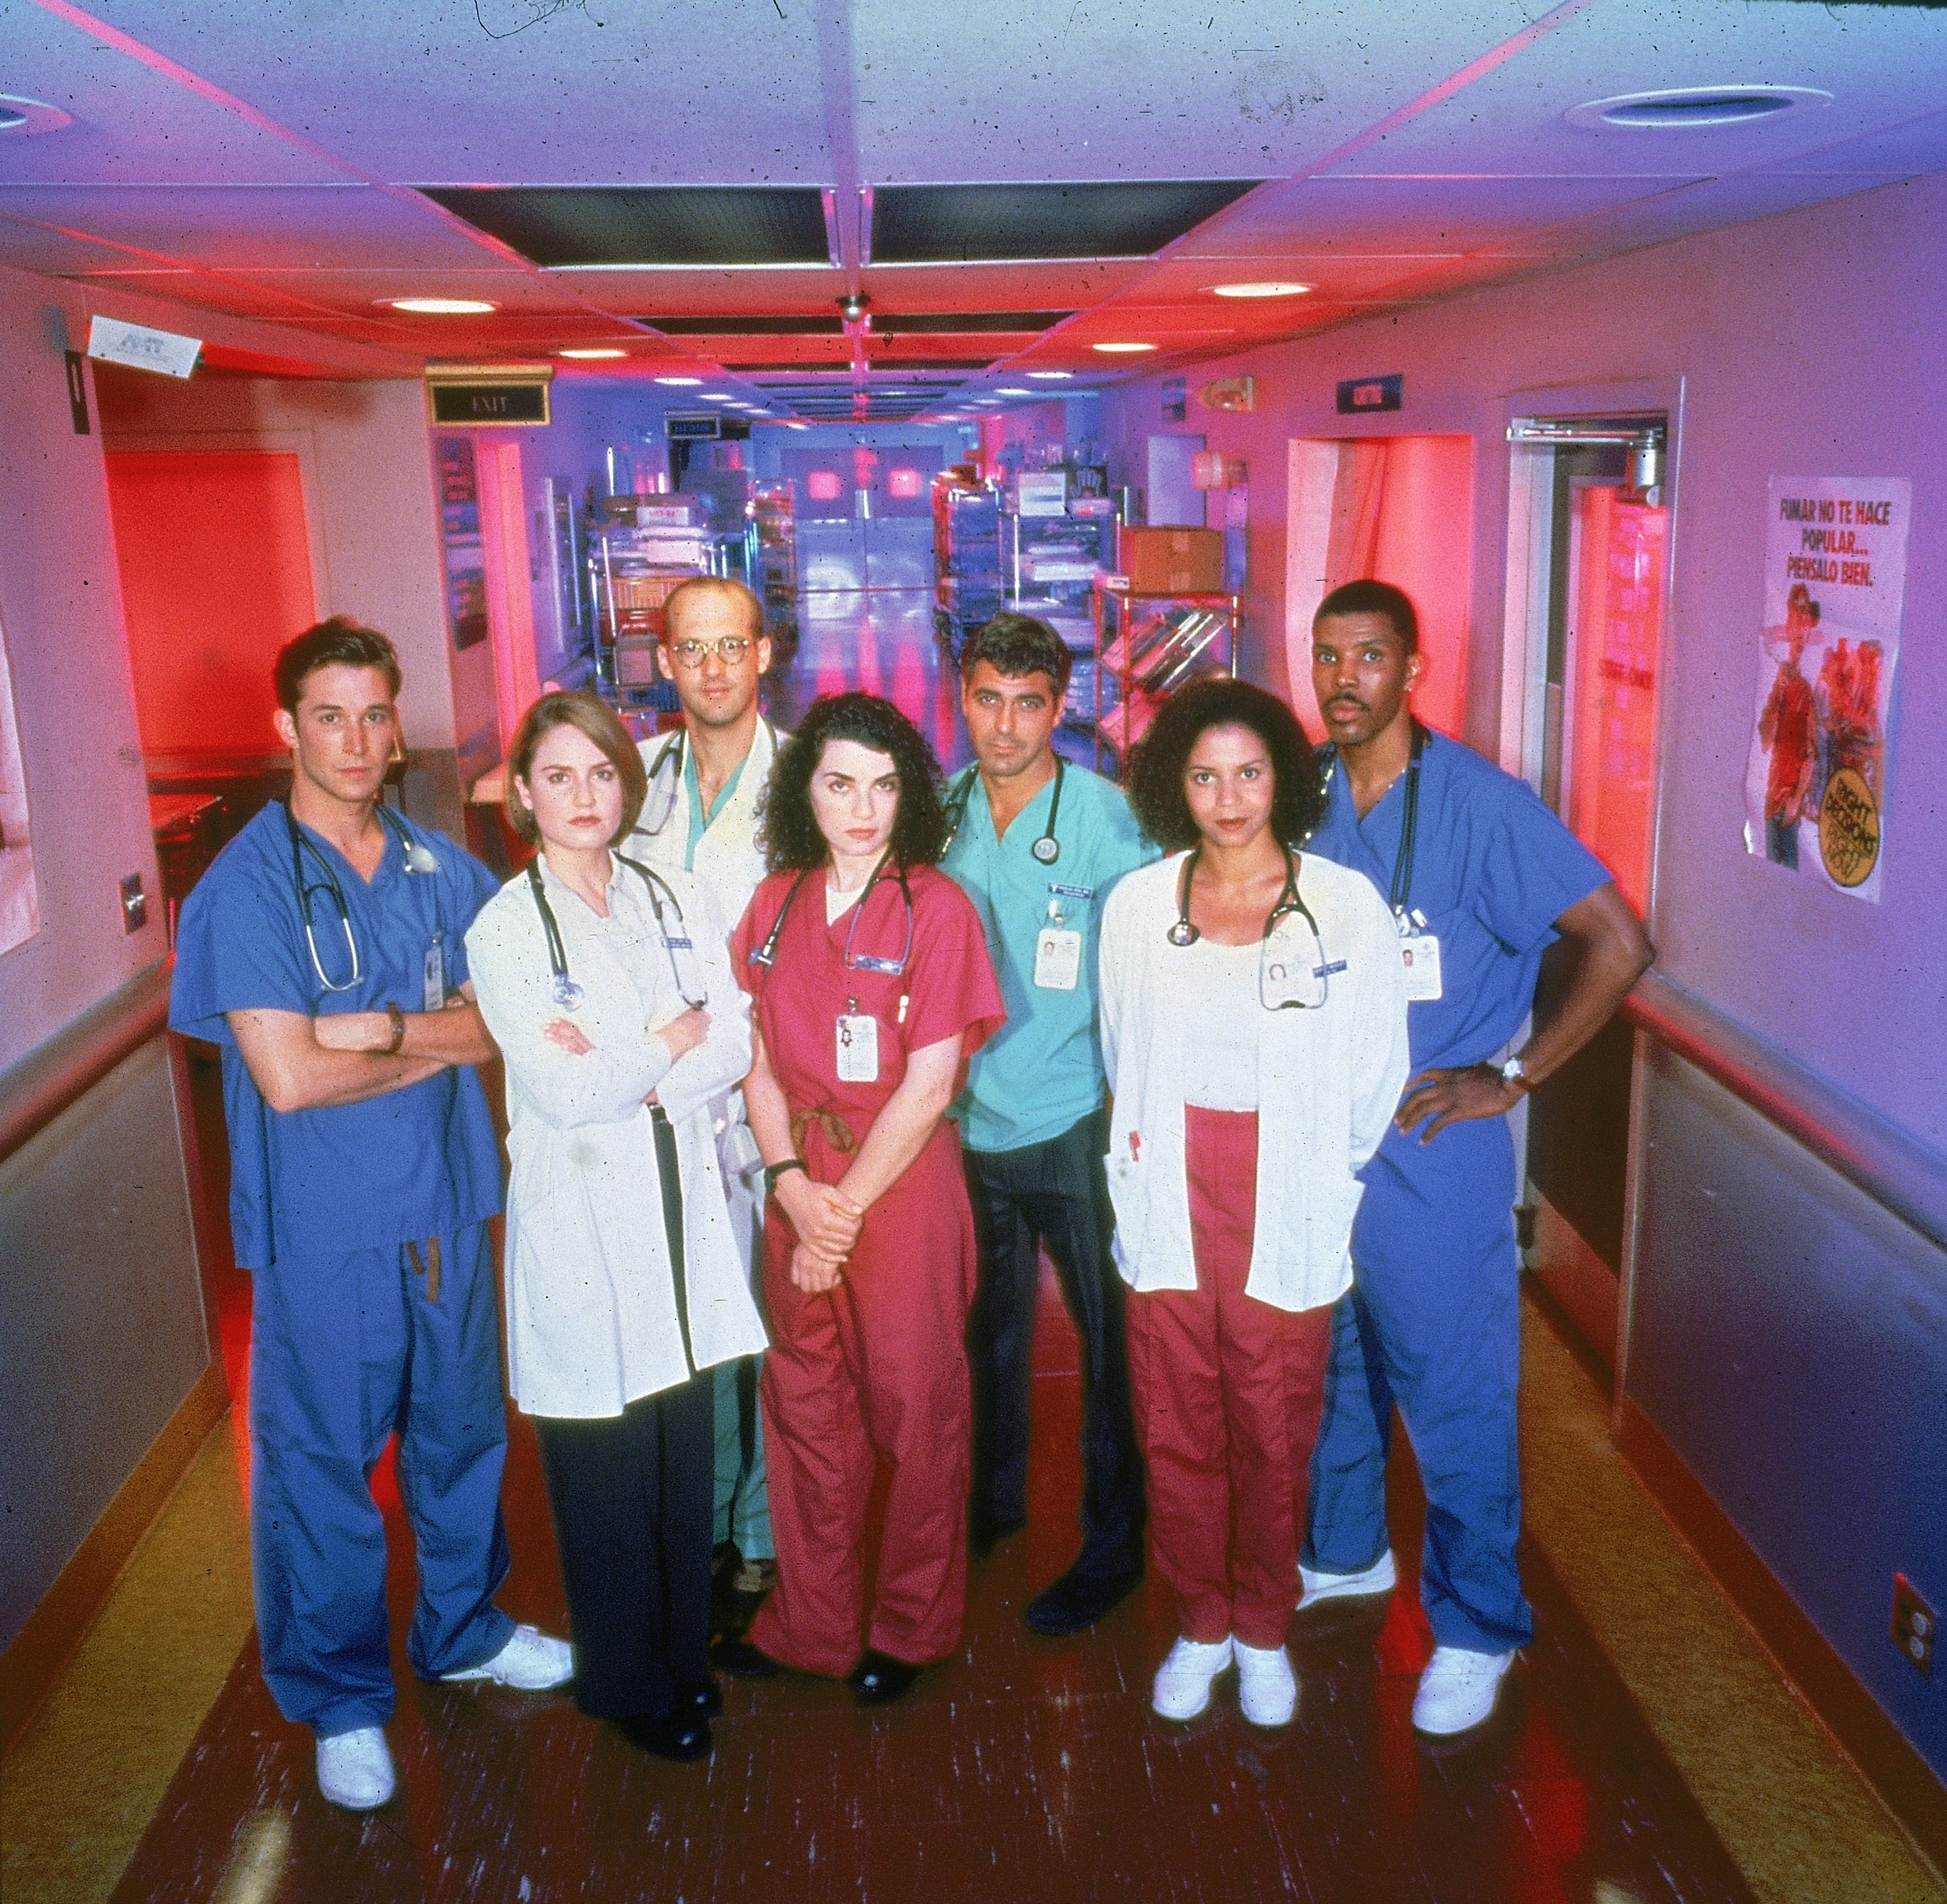 The Cast of ‘ER’ in 1996 - Noah Wyle, Sherry Stringfield, Anthony Edwards, Julianna Margulies, George Clooney, Gloria Reuben and Eriq La Salle